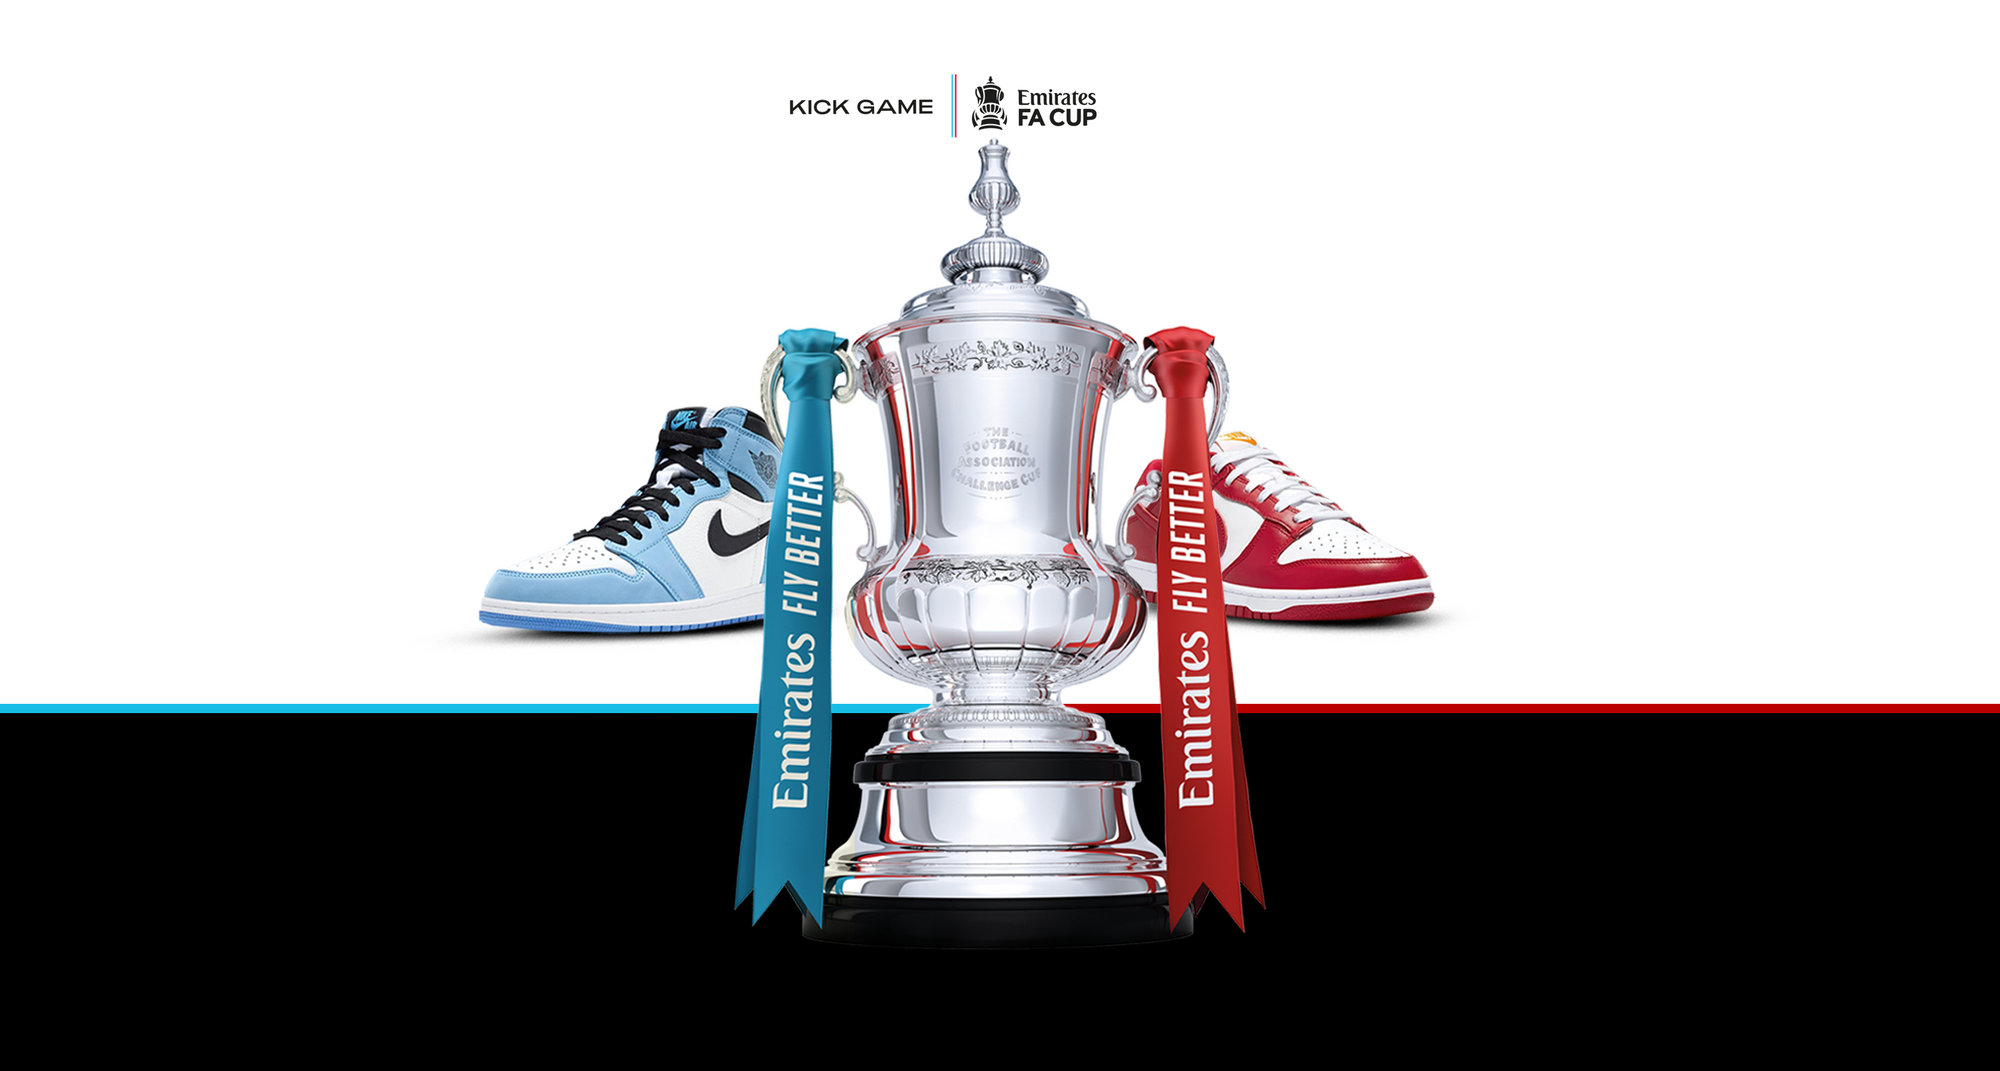 Kick Game Partnered With Emirates Fa Cup and Versus to Mark 2023’s Prestigious Game